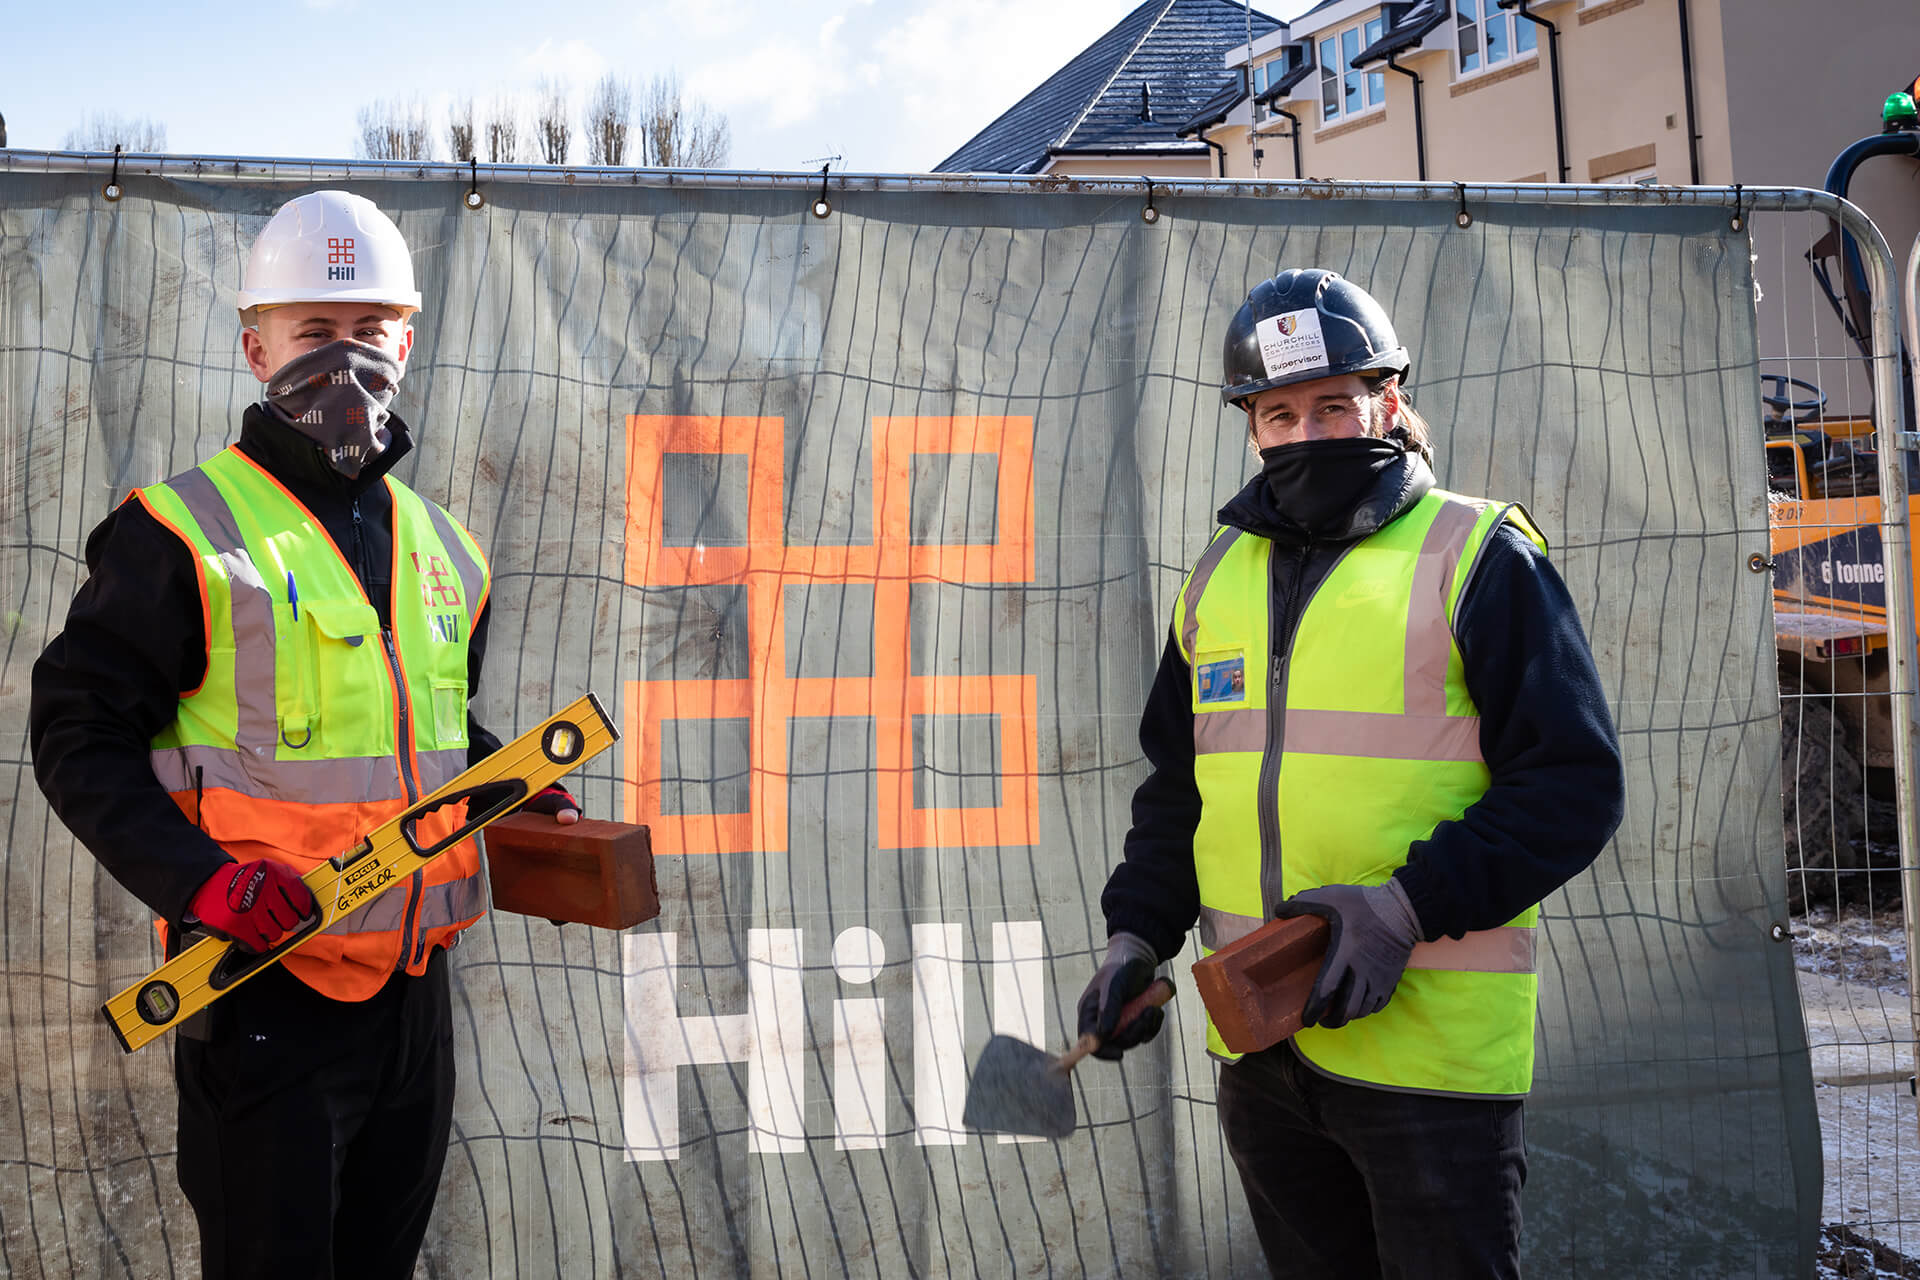 PR photography of 2 builders celebrating a collaboration for building apprentiships at a college